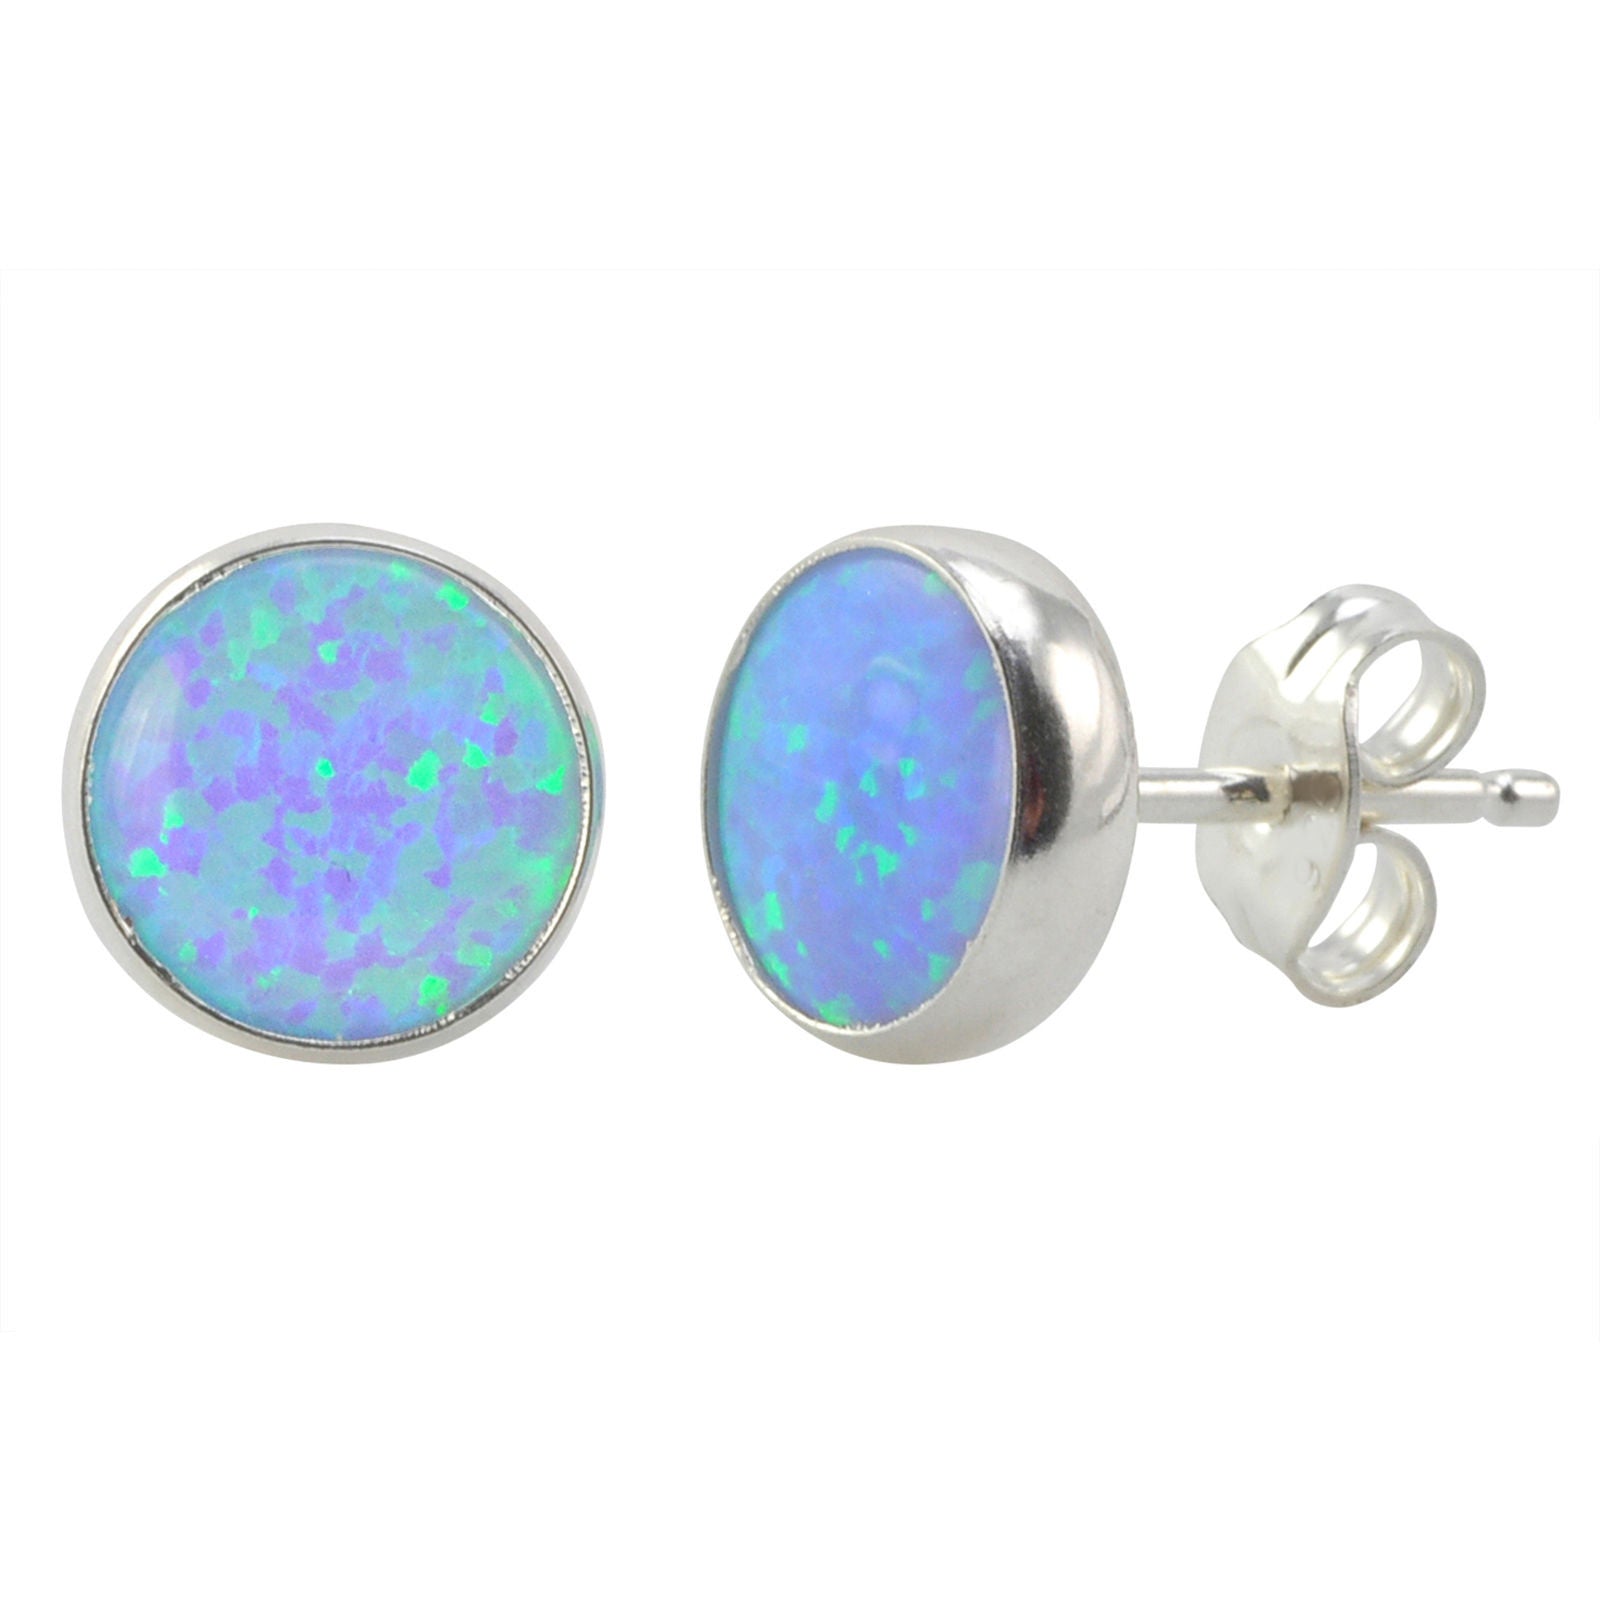 Details about  / Sterling Silver Jewellery Opalescent Green 9mm Round Stud Earrings Featuring...